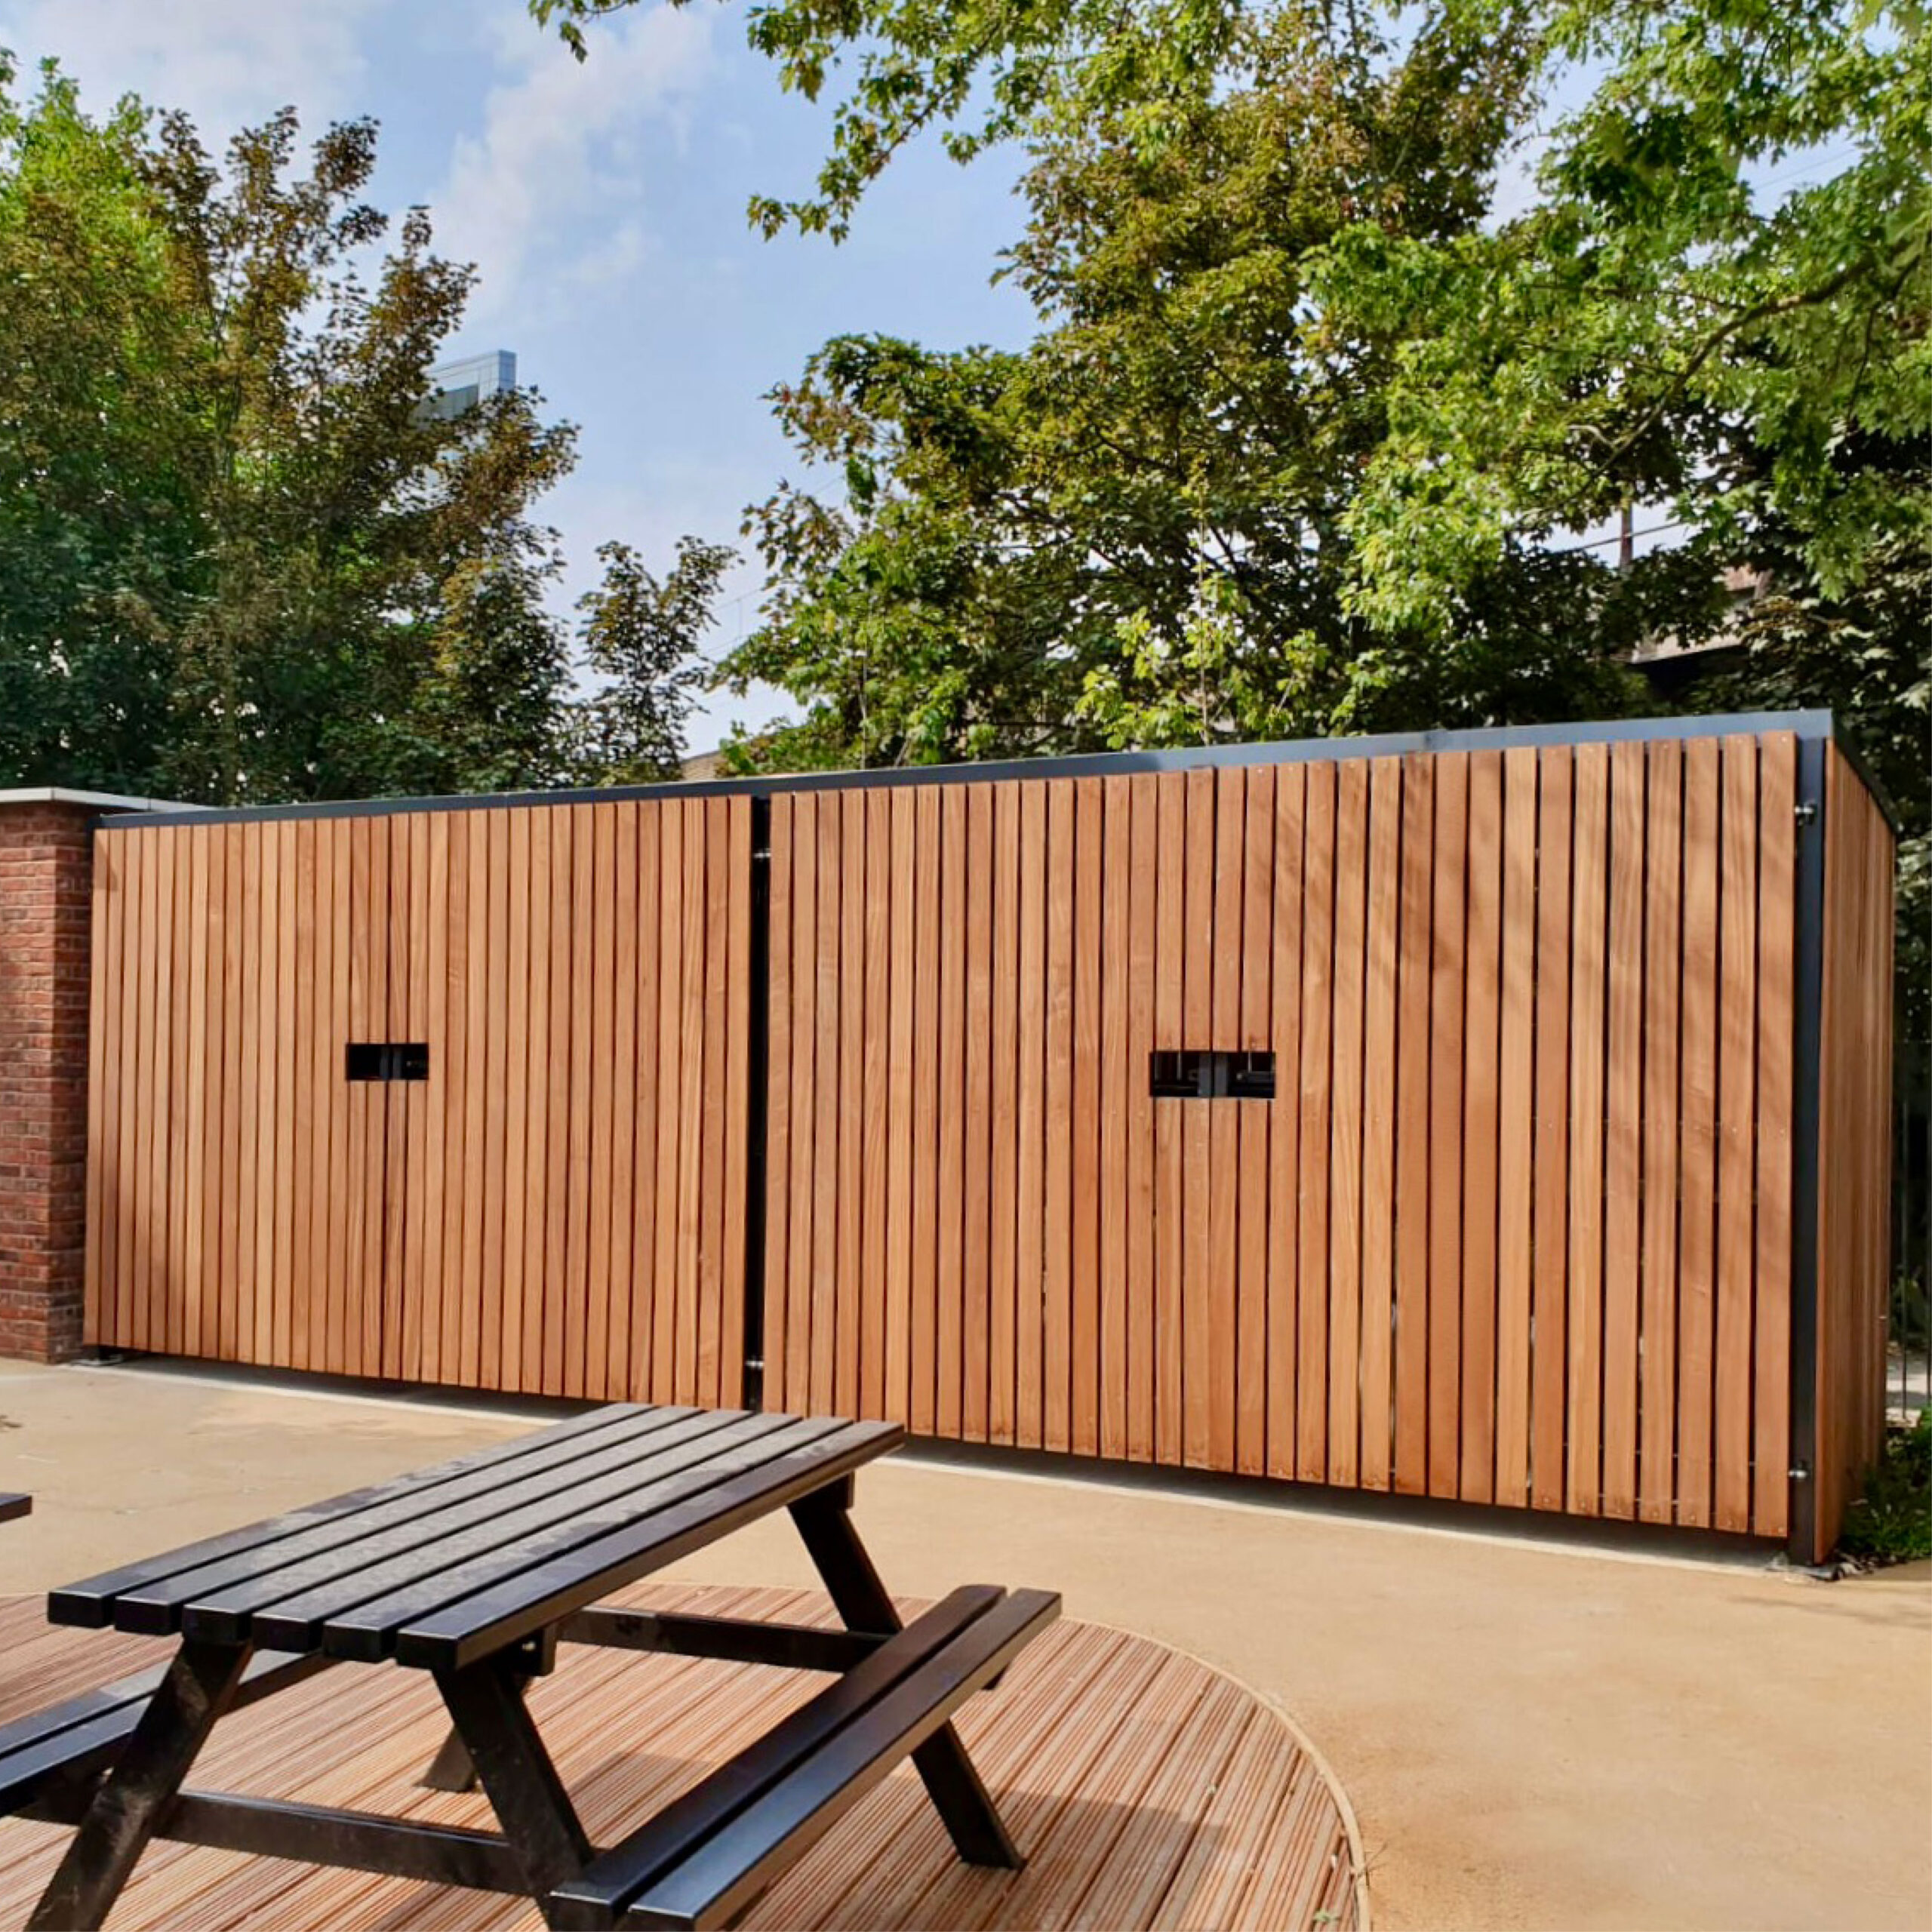 A two-tier wooden cycle shelter with closed swing doors underneath green trees